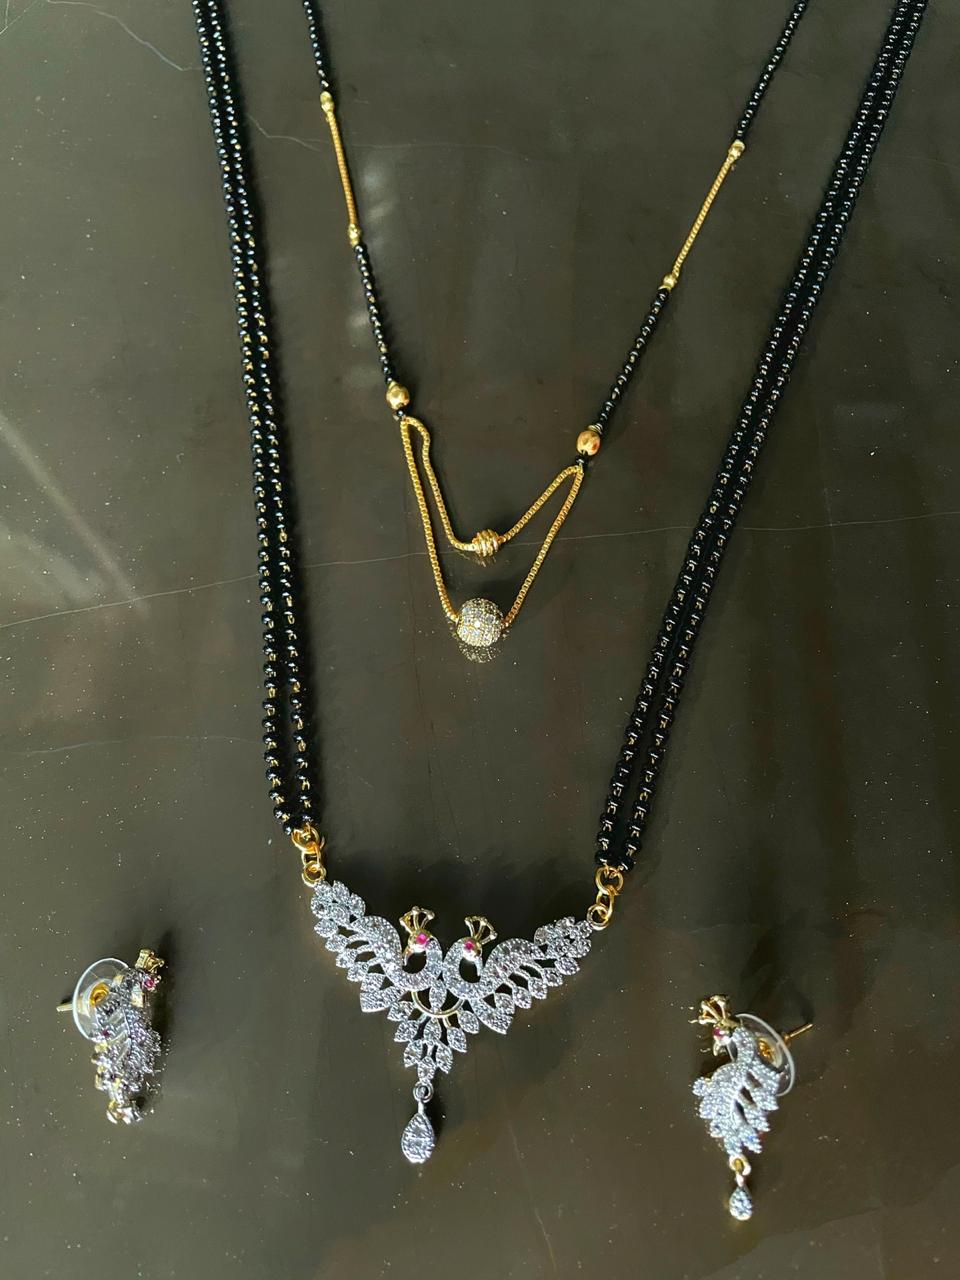 Combo Offer (Set of 2) Gold Plated Short Mangalsutra Design & Long Mangalsutra Design With American Diamond Peacock Pendant with Earrings